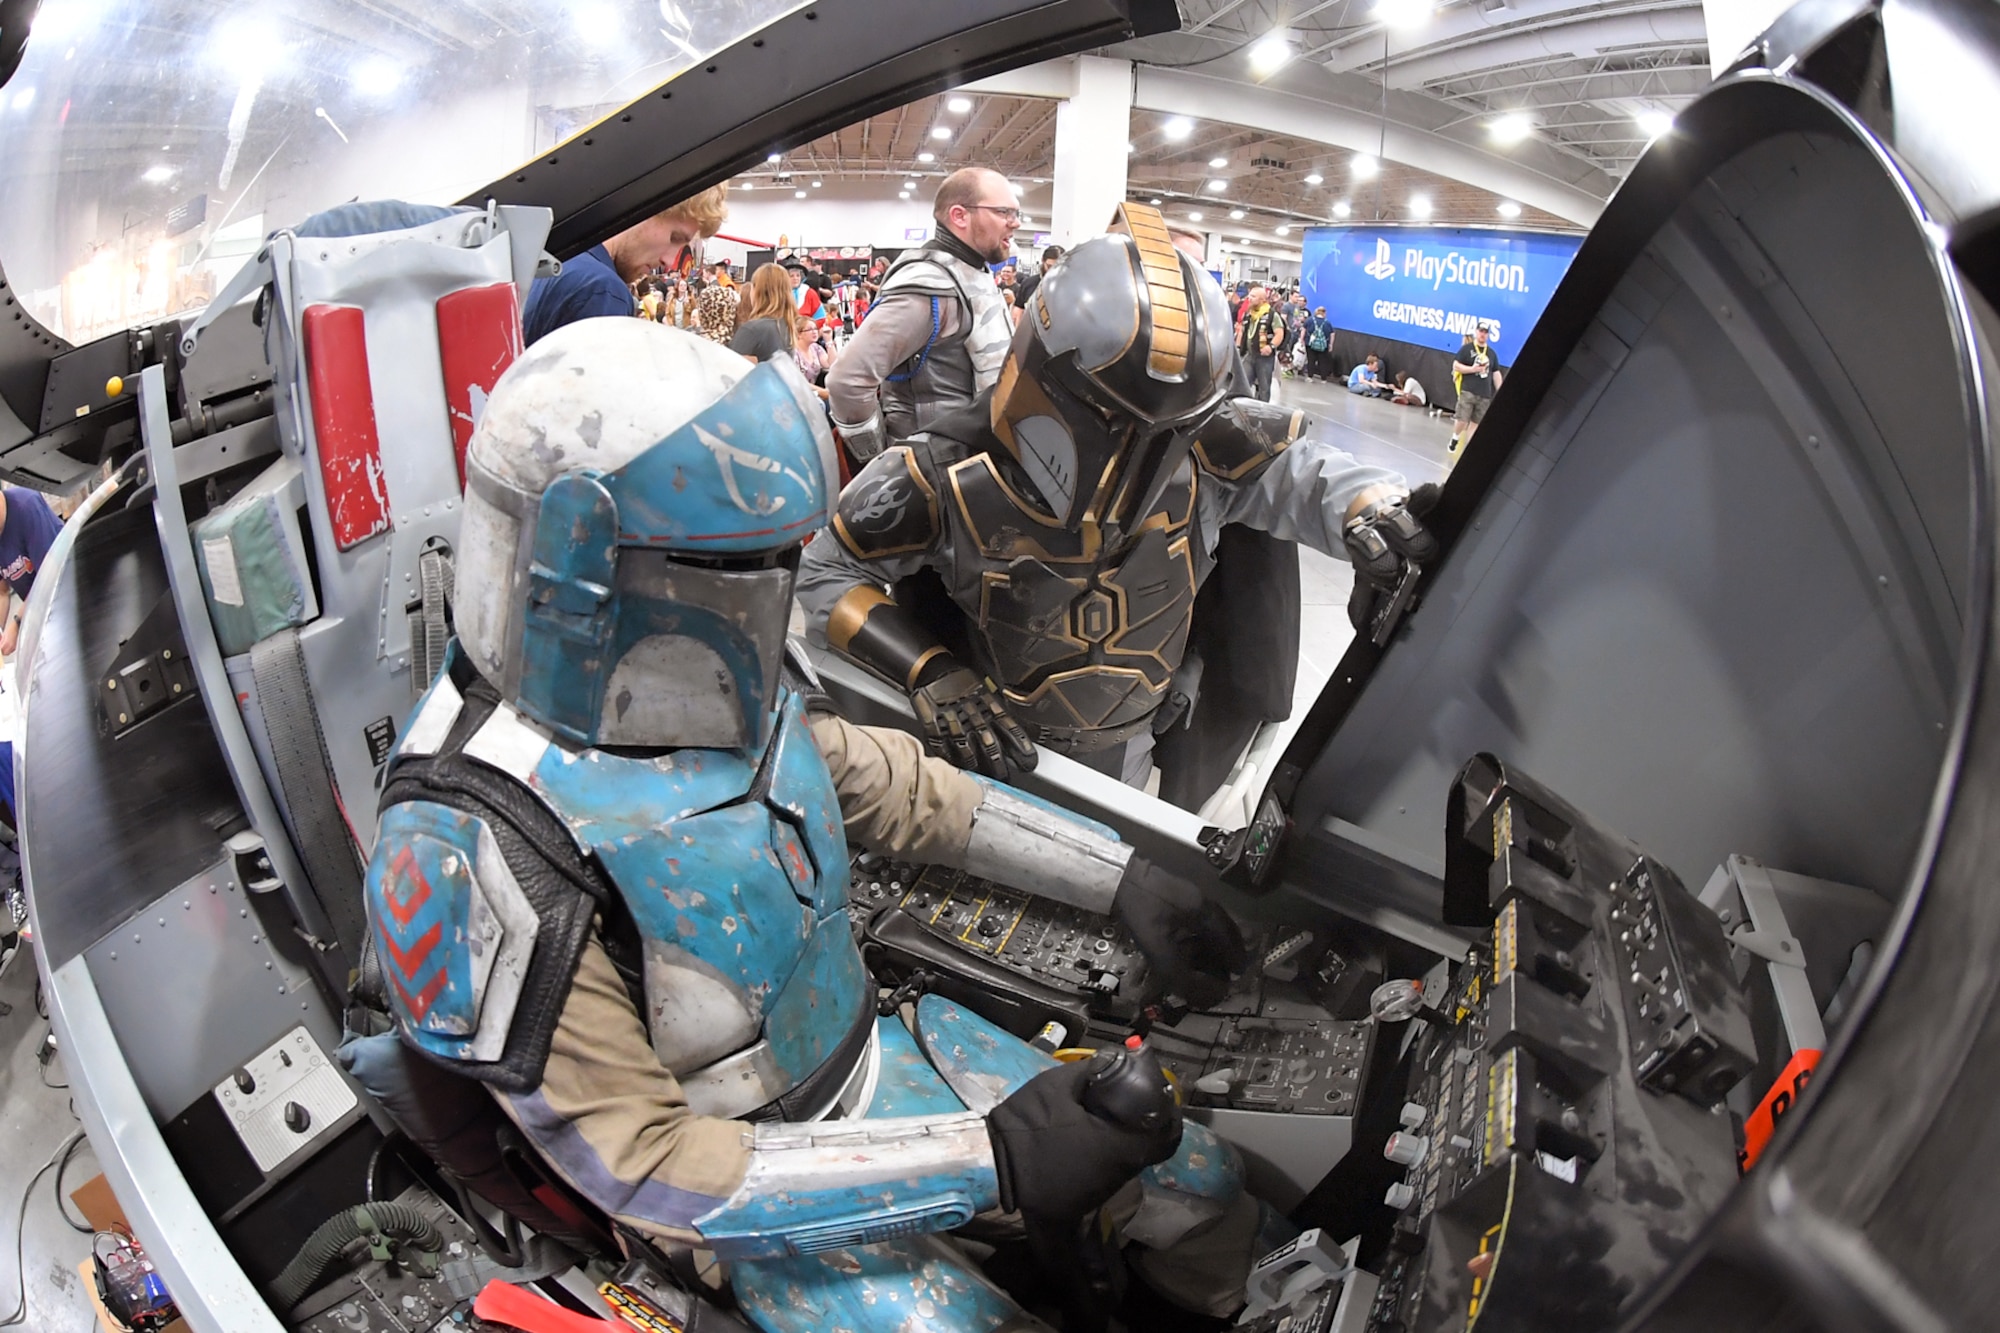 FanX visitors dressed as Star Wars characters try out the A-10 cockpit flight simulator at the Hill Air Force Base STEM Outreach booth, Sept. 7, 2018, Salt Lake City.